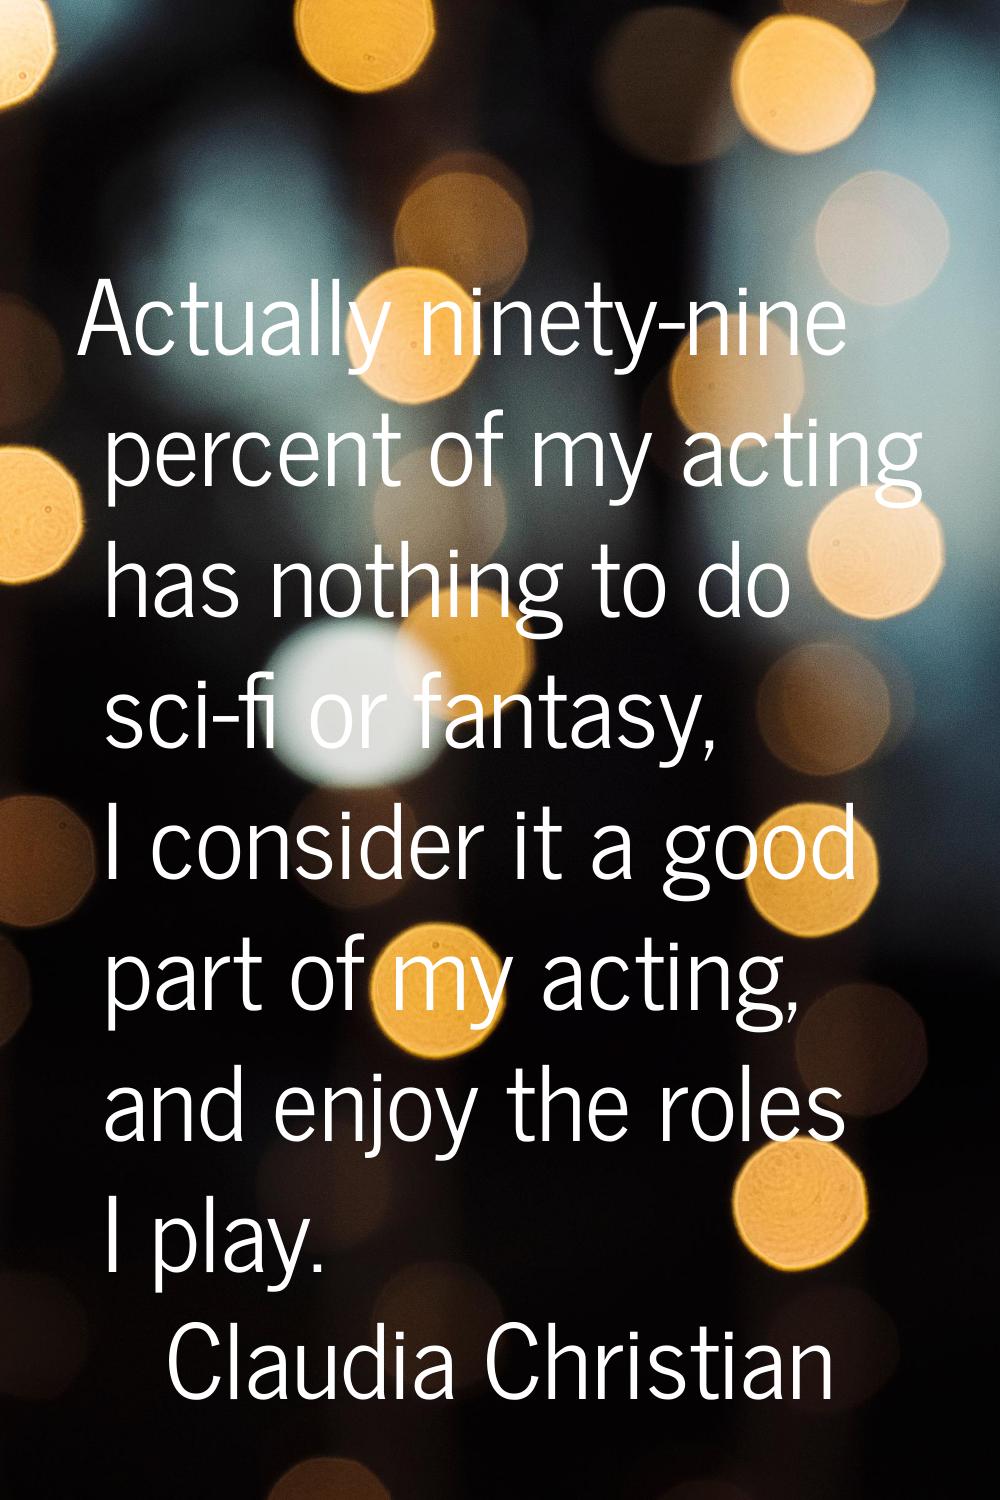 Actually ninety-nine percent of my acting has nothing to do sci-fi or fantasy, I consider it a good